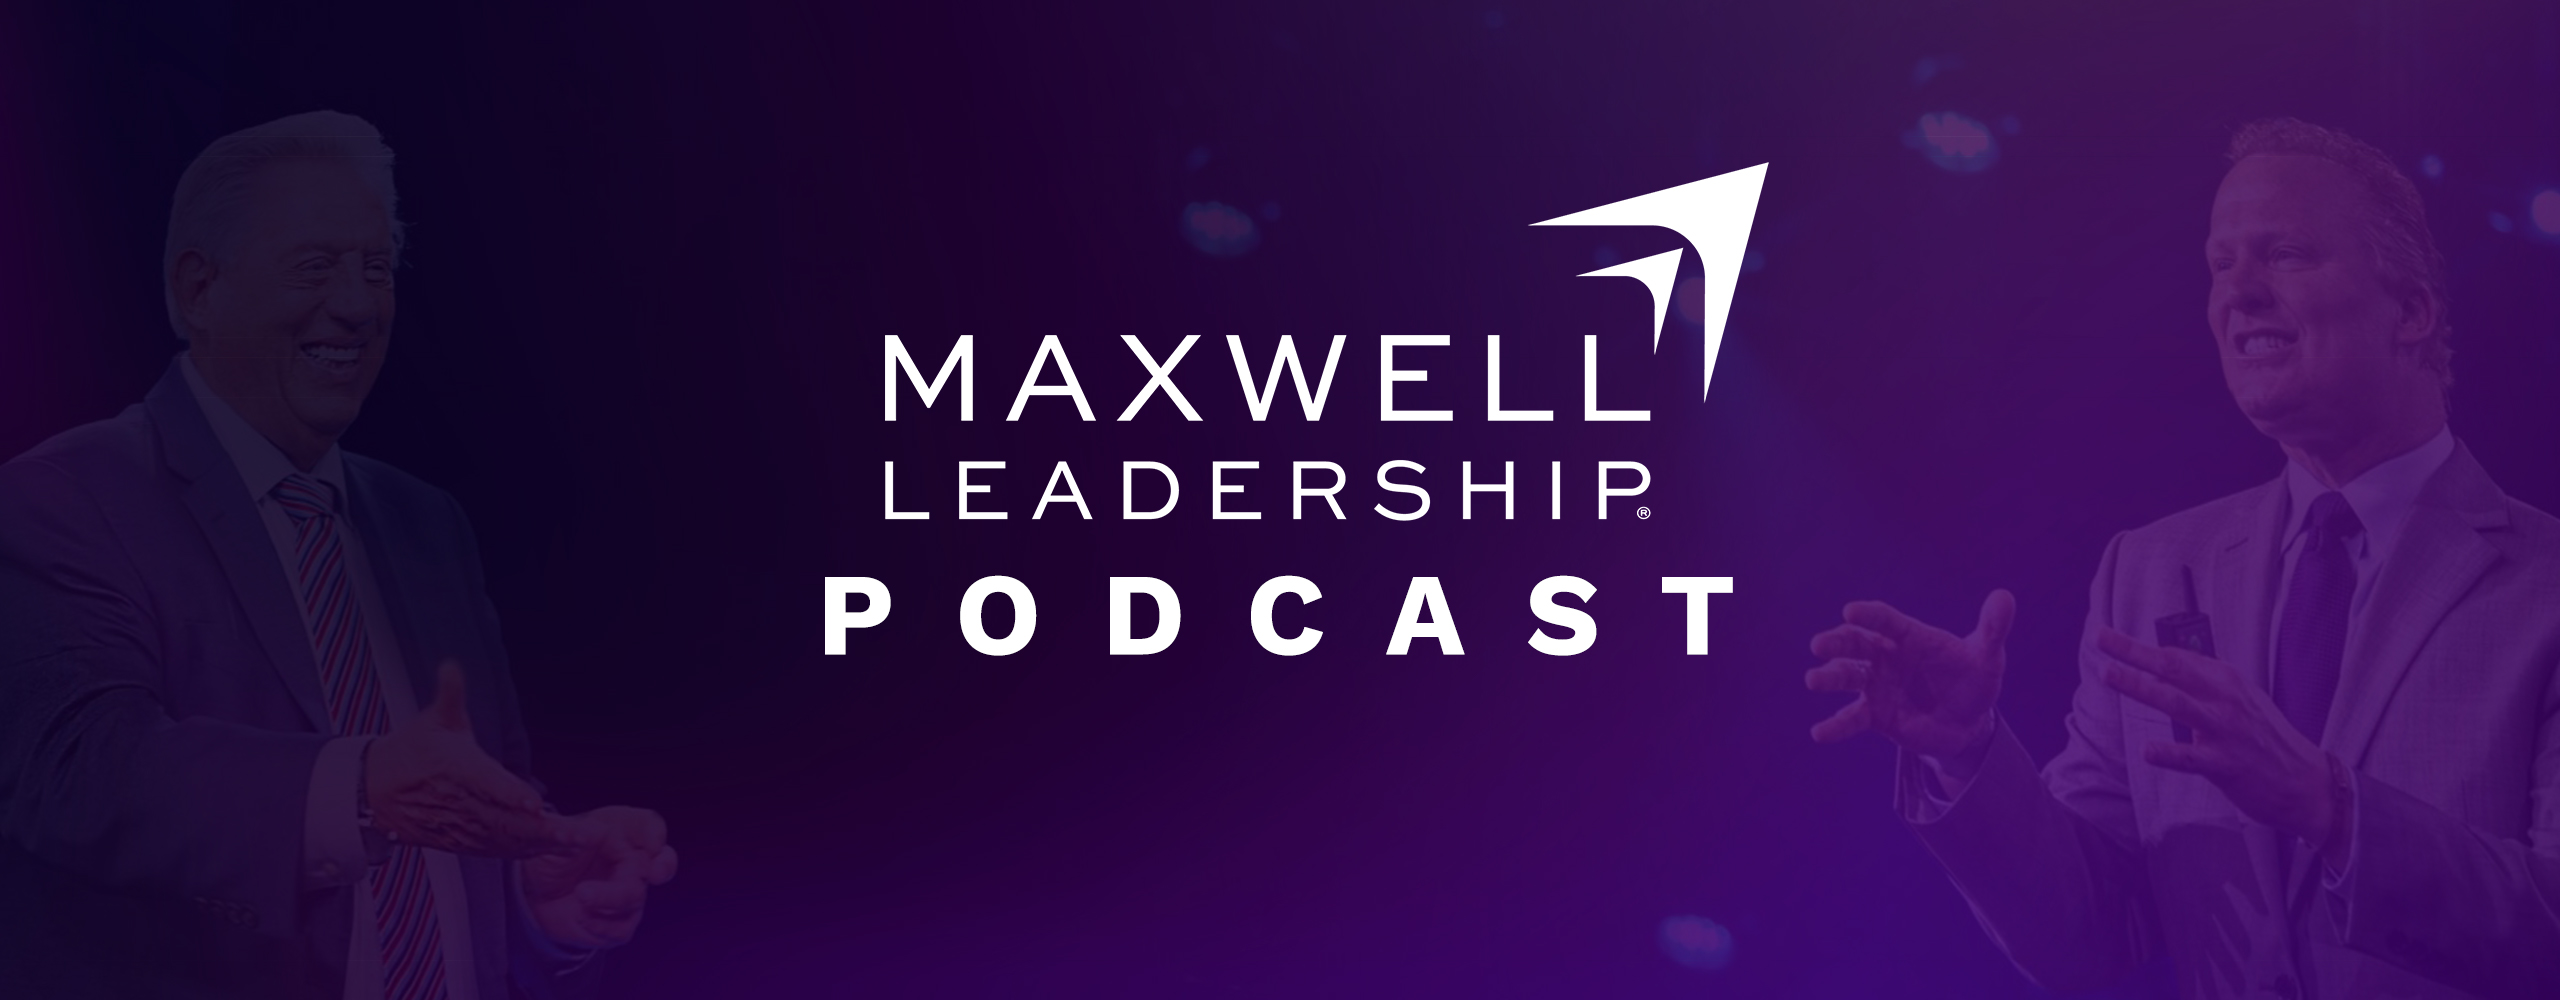 Leadership Podcasts